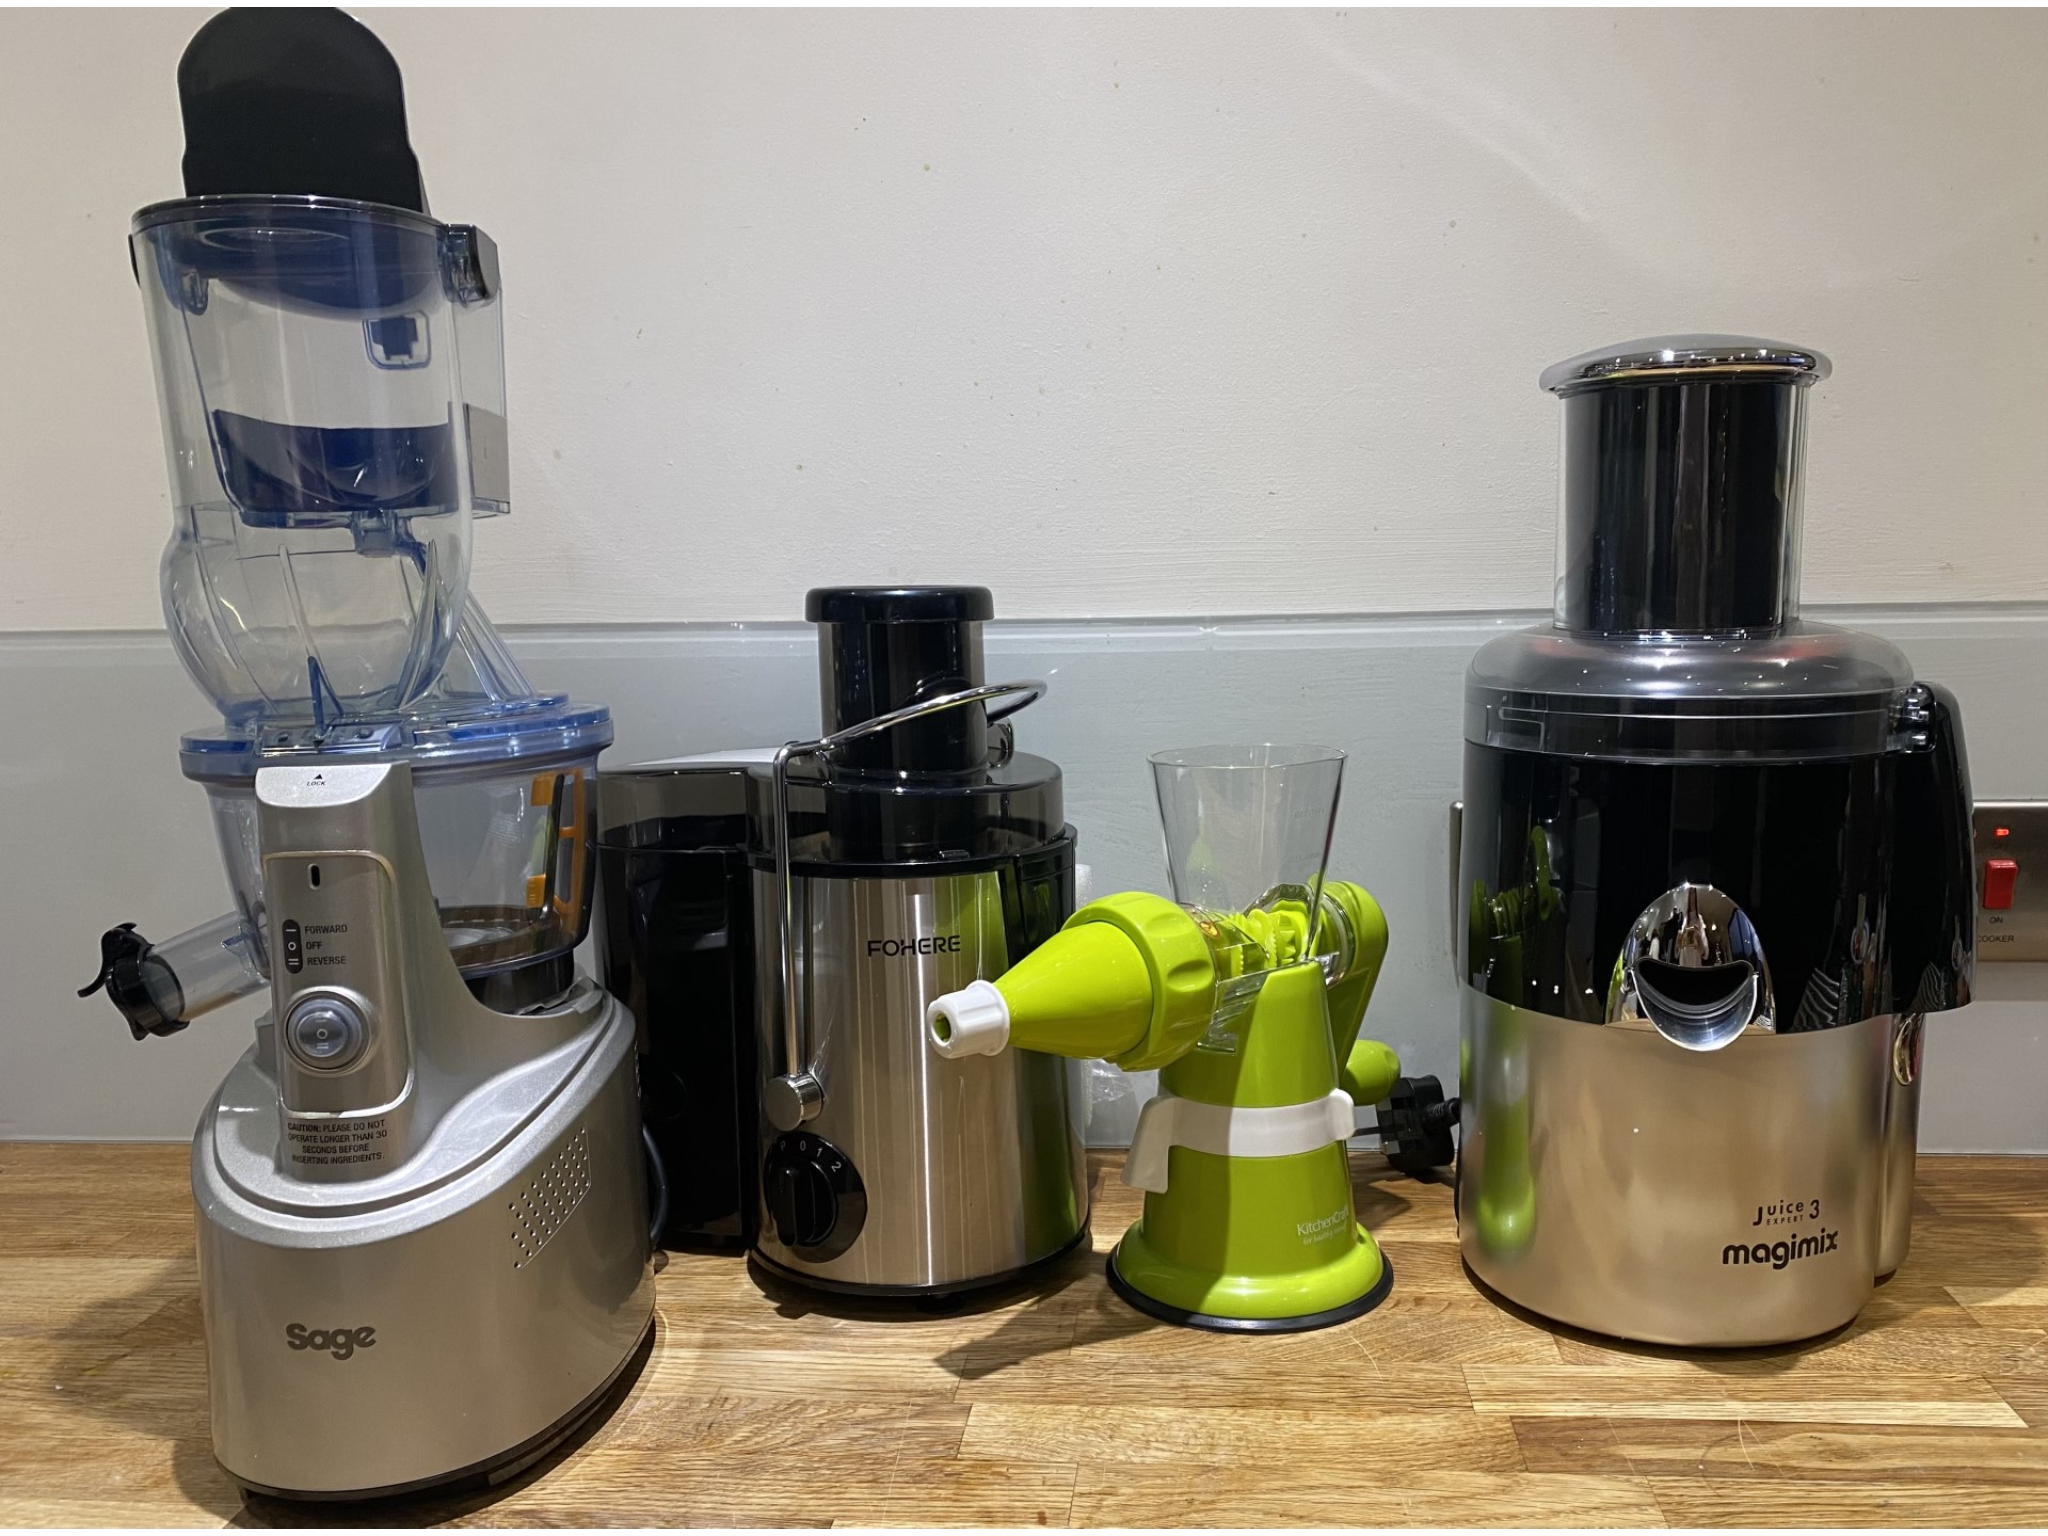 A selection of the best juicers that we tried and tested for this review